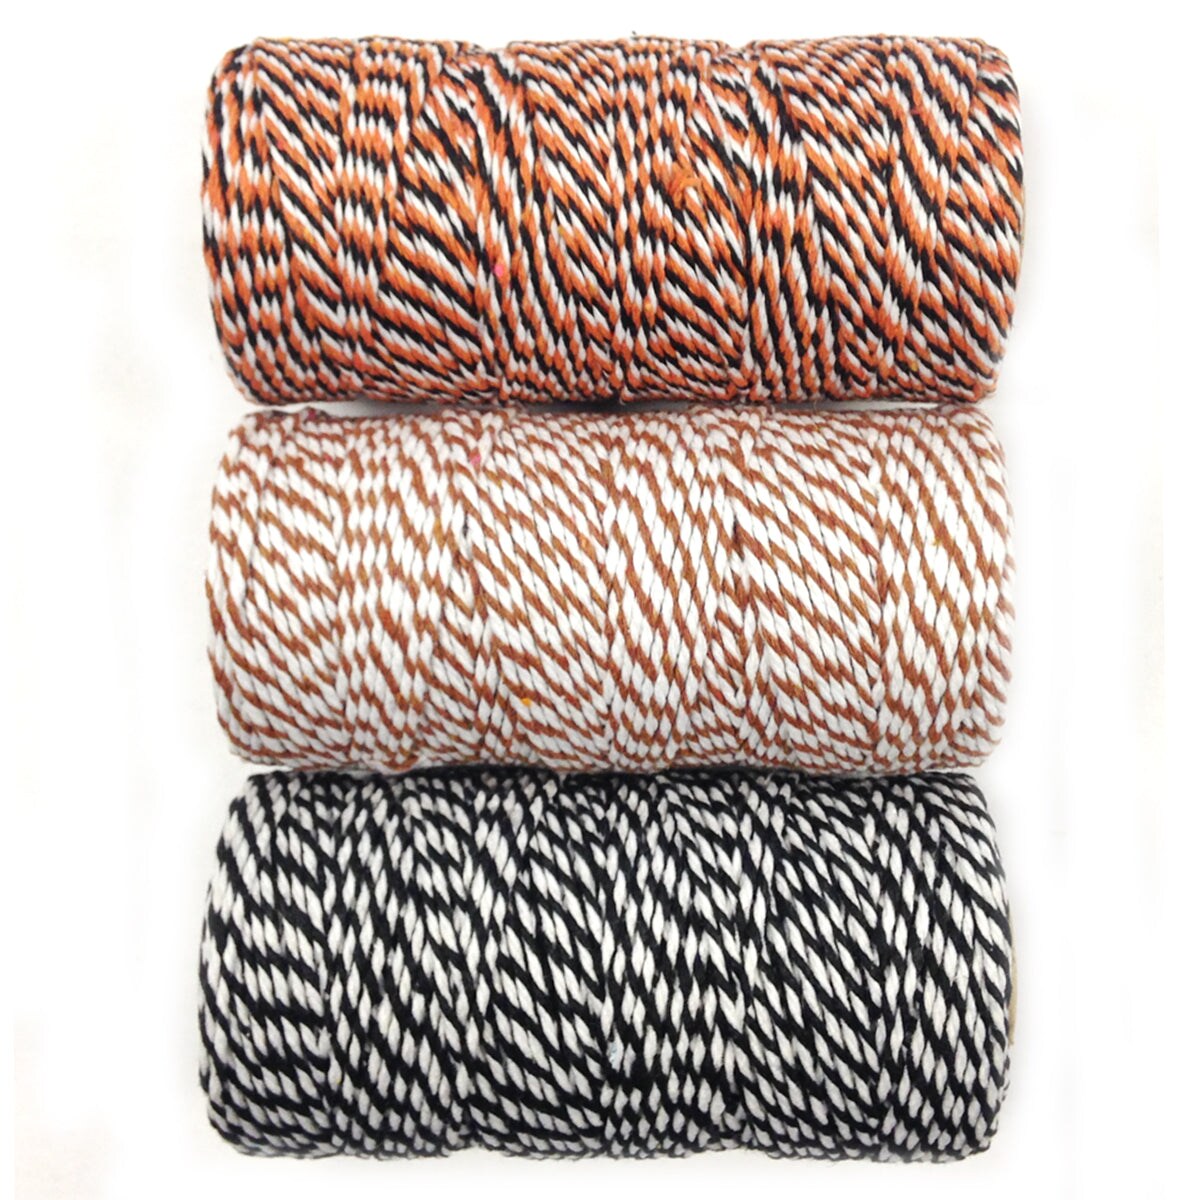 Wrapables Cotton Baker&#x27;s Twine 12ply 330 Yards (Set of 3 Spools x 110 Yards) for Gift Wrapping, Party Decor, and Arts and Crafts (Black &#x26; Orange, Brown, Black)